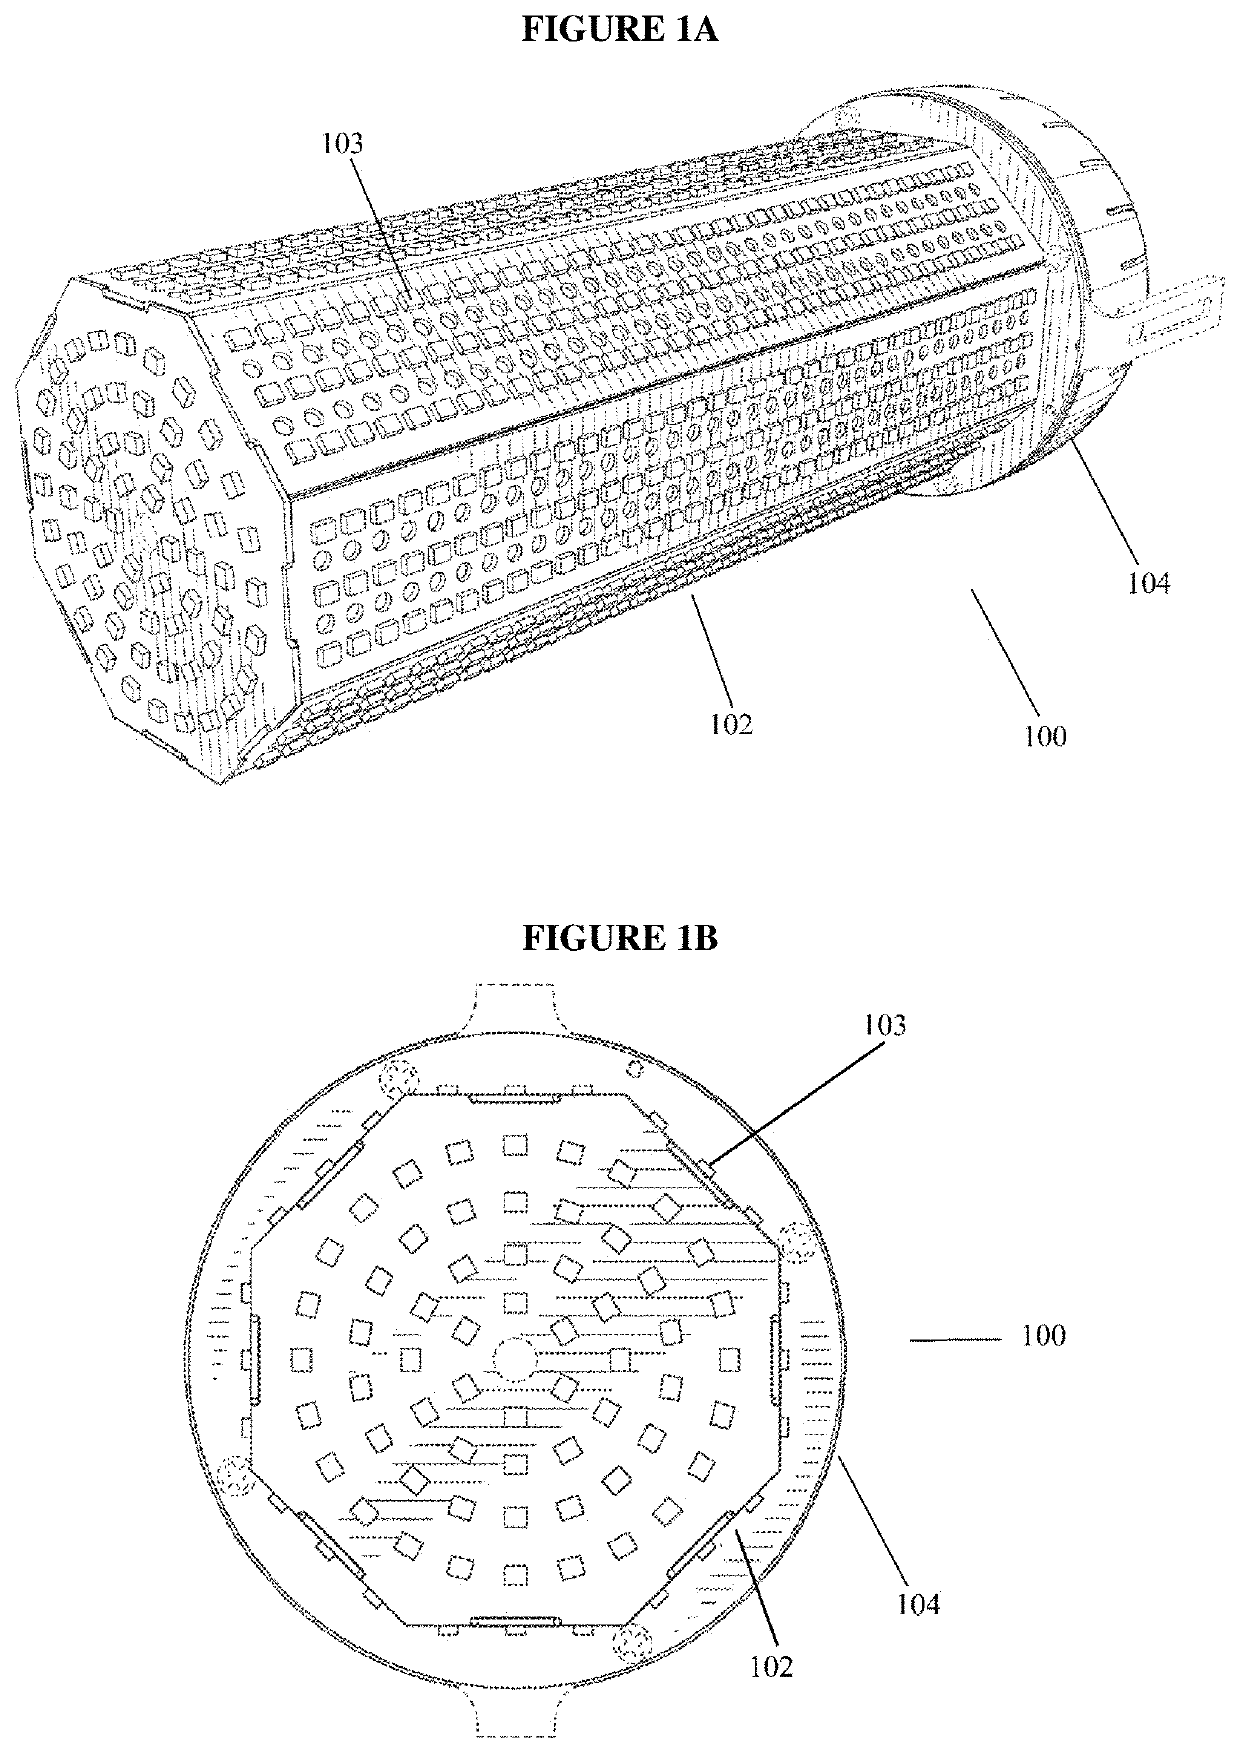 Ultraviolet disinfection device and uses thereof